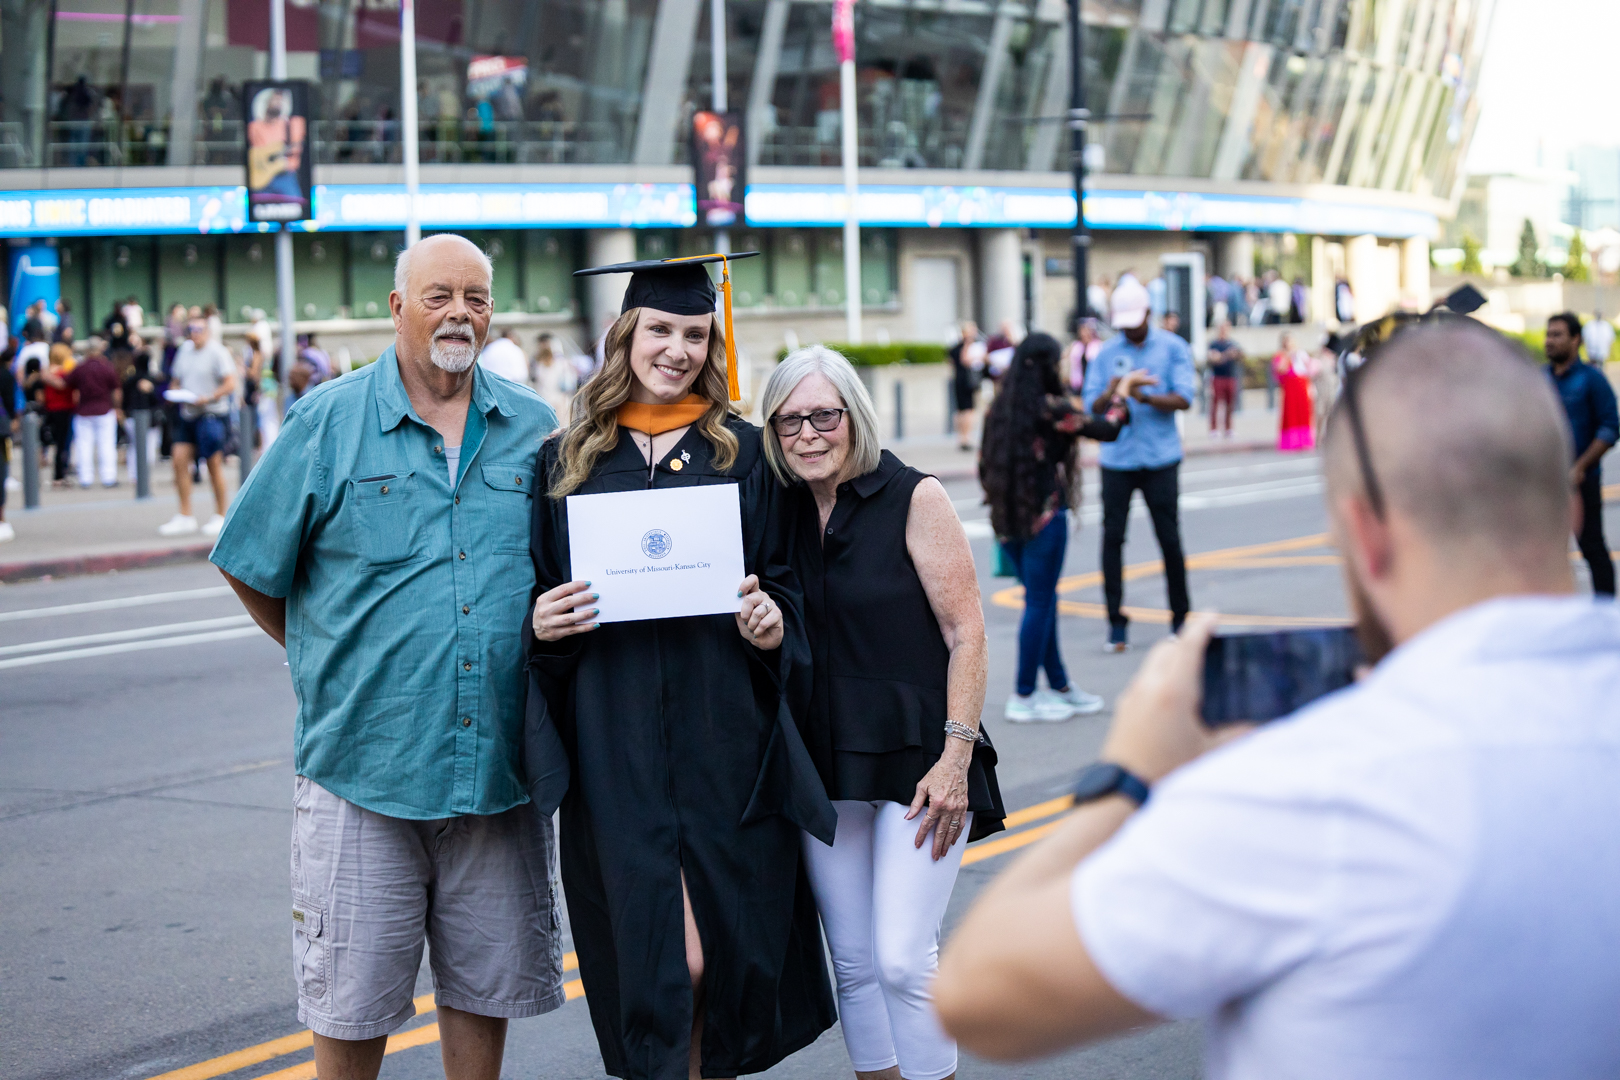 parents taking a photo with a student in cap and gown at commencement